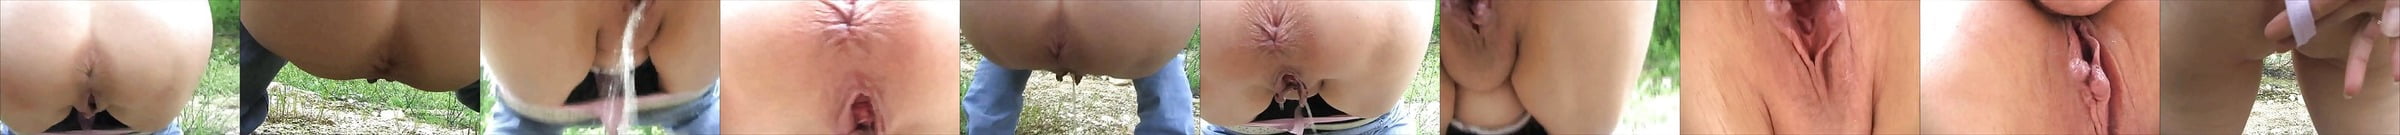 Female Pee Compilation Free Close Up Piss Hd Porn 51